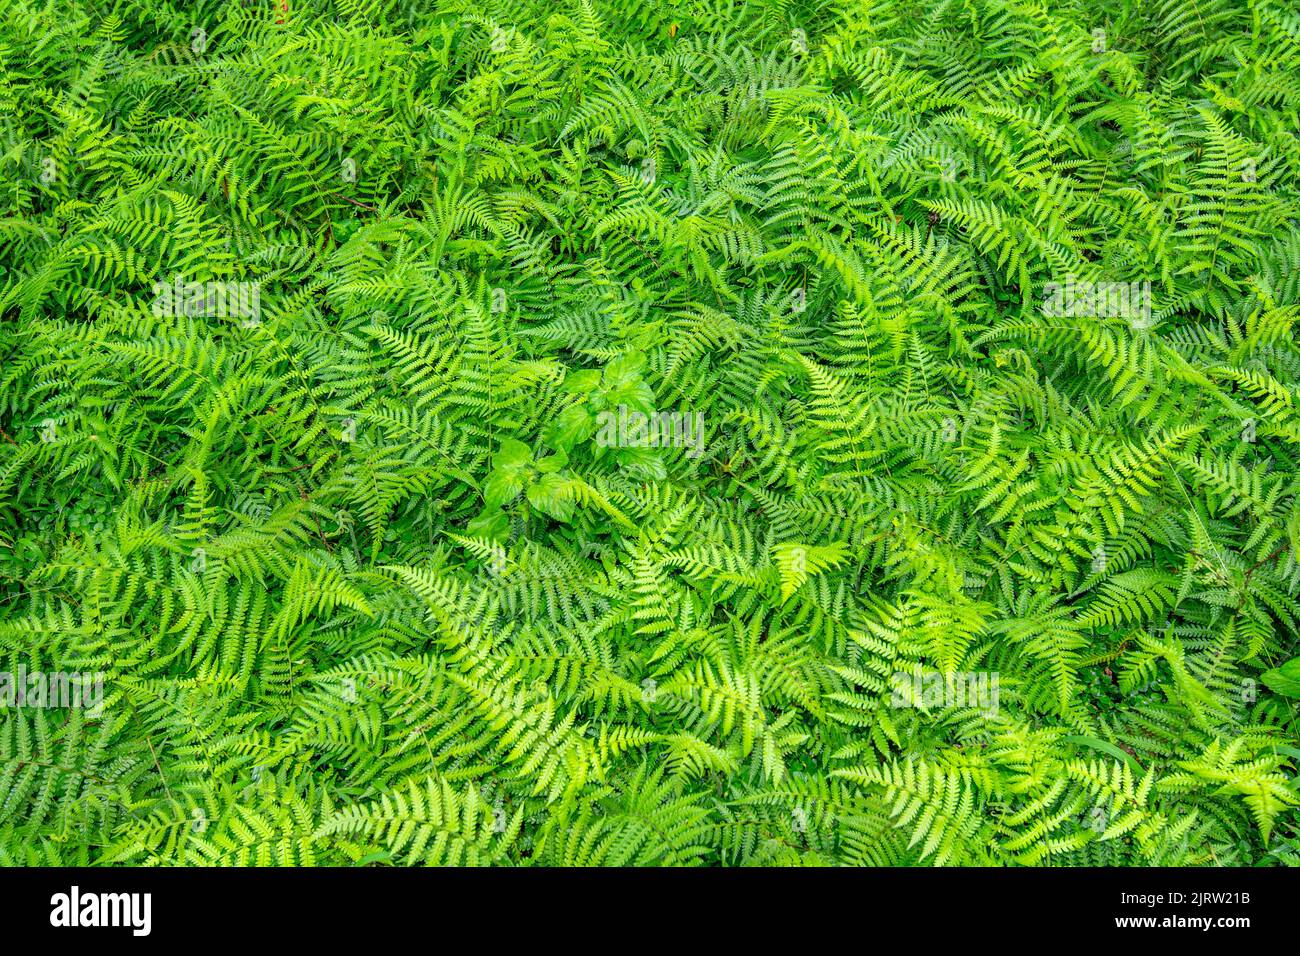 Lush fern plants in the wilderness of the south pacific show how vibrant nature is in this region. Stock Photo